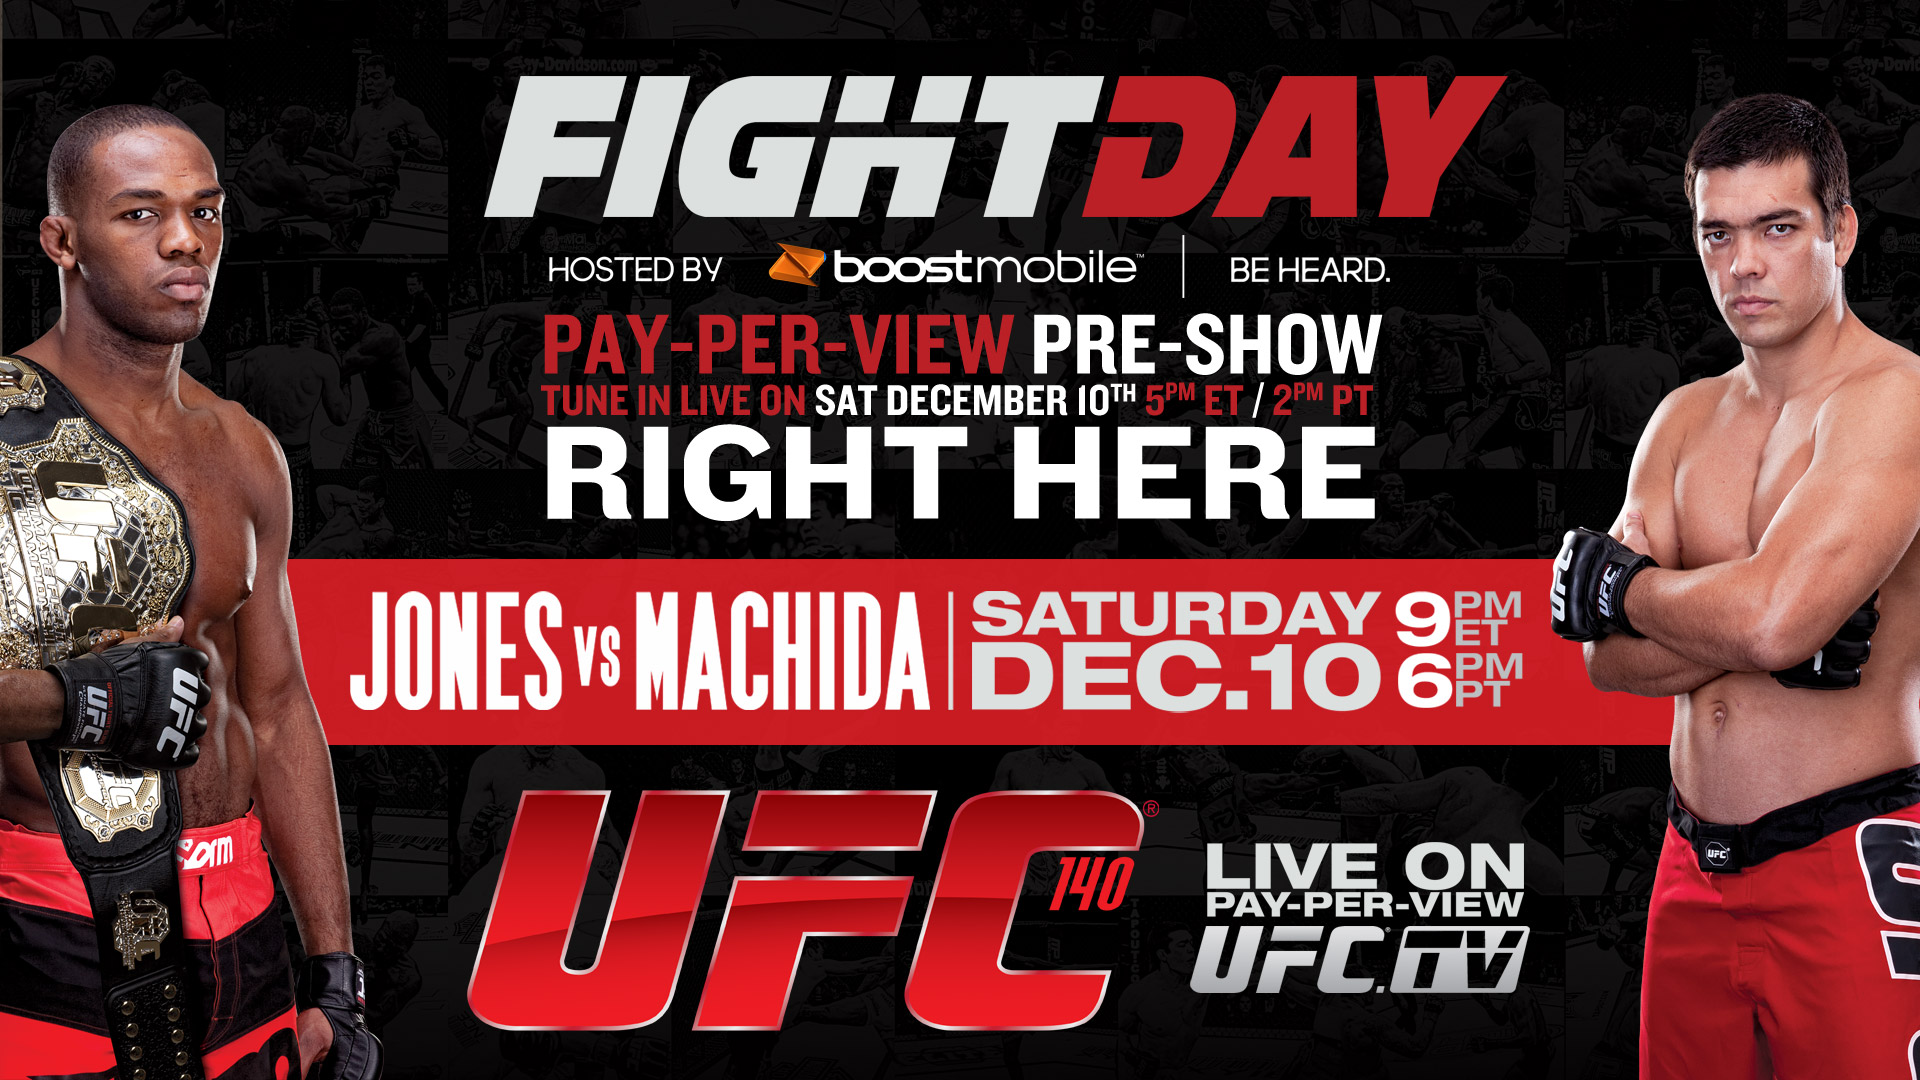 UFC 140 Fight Day Live From Toronto at 5 p.m. ET